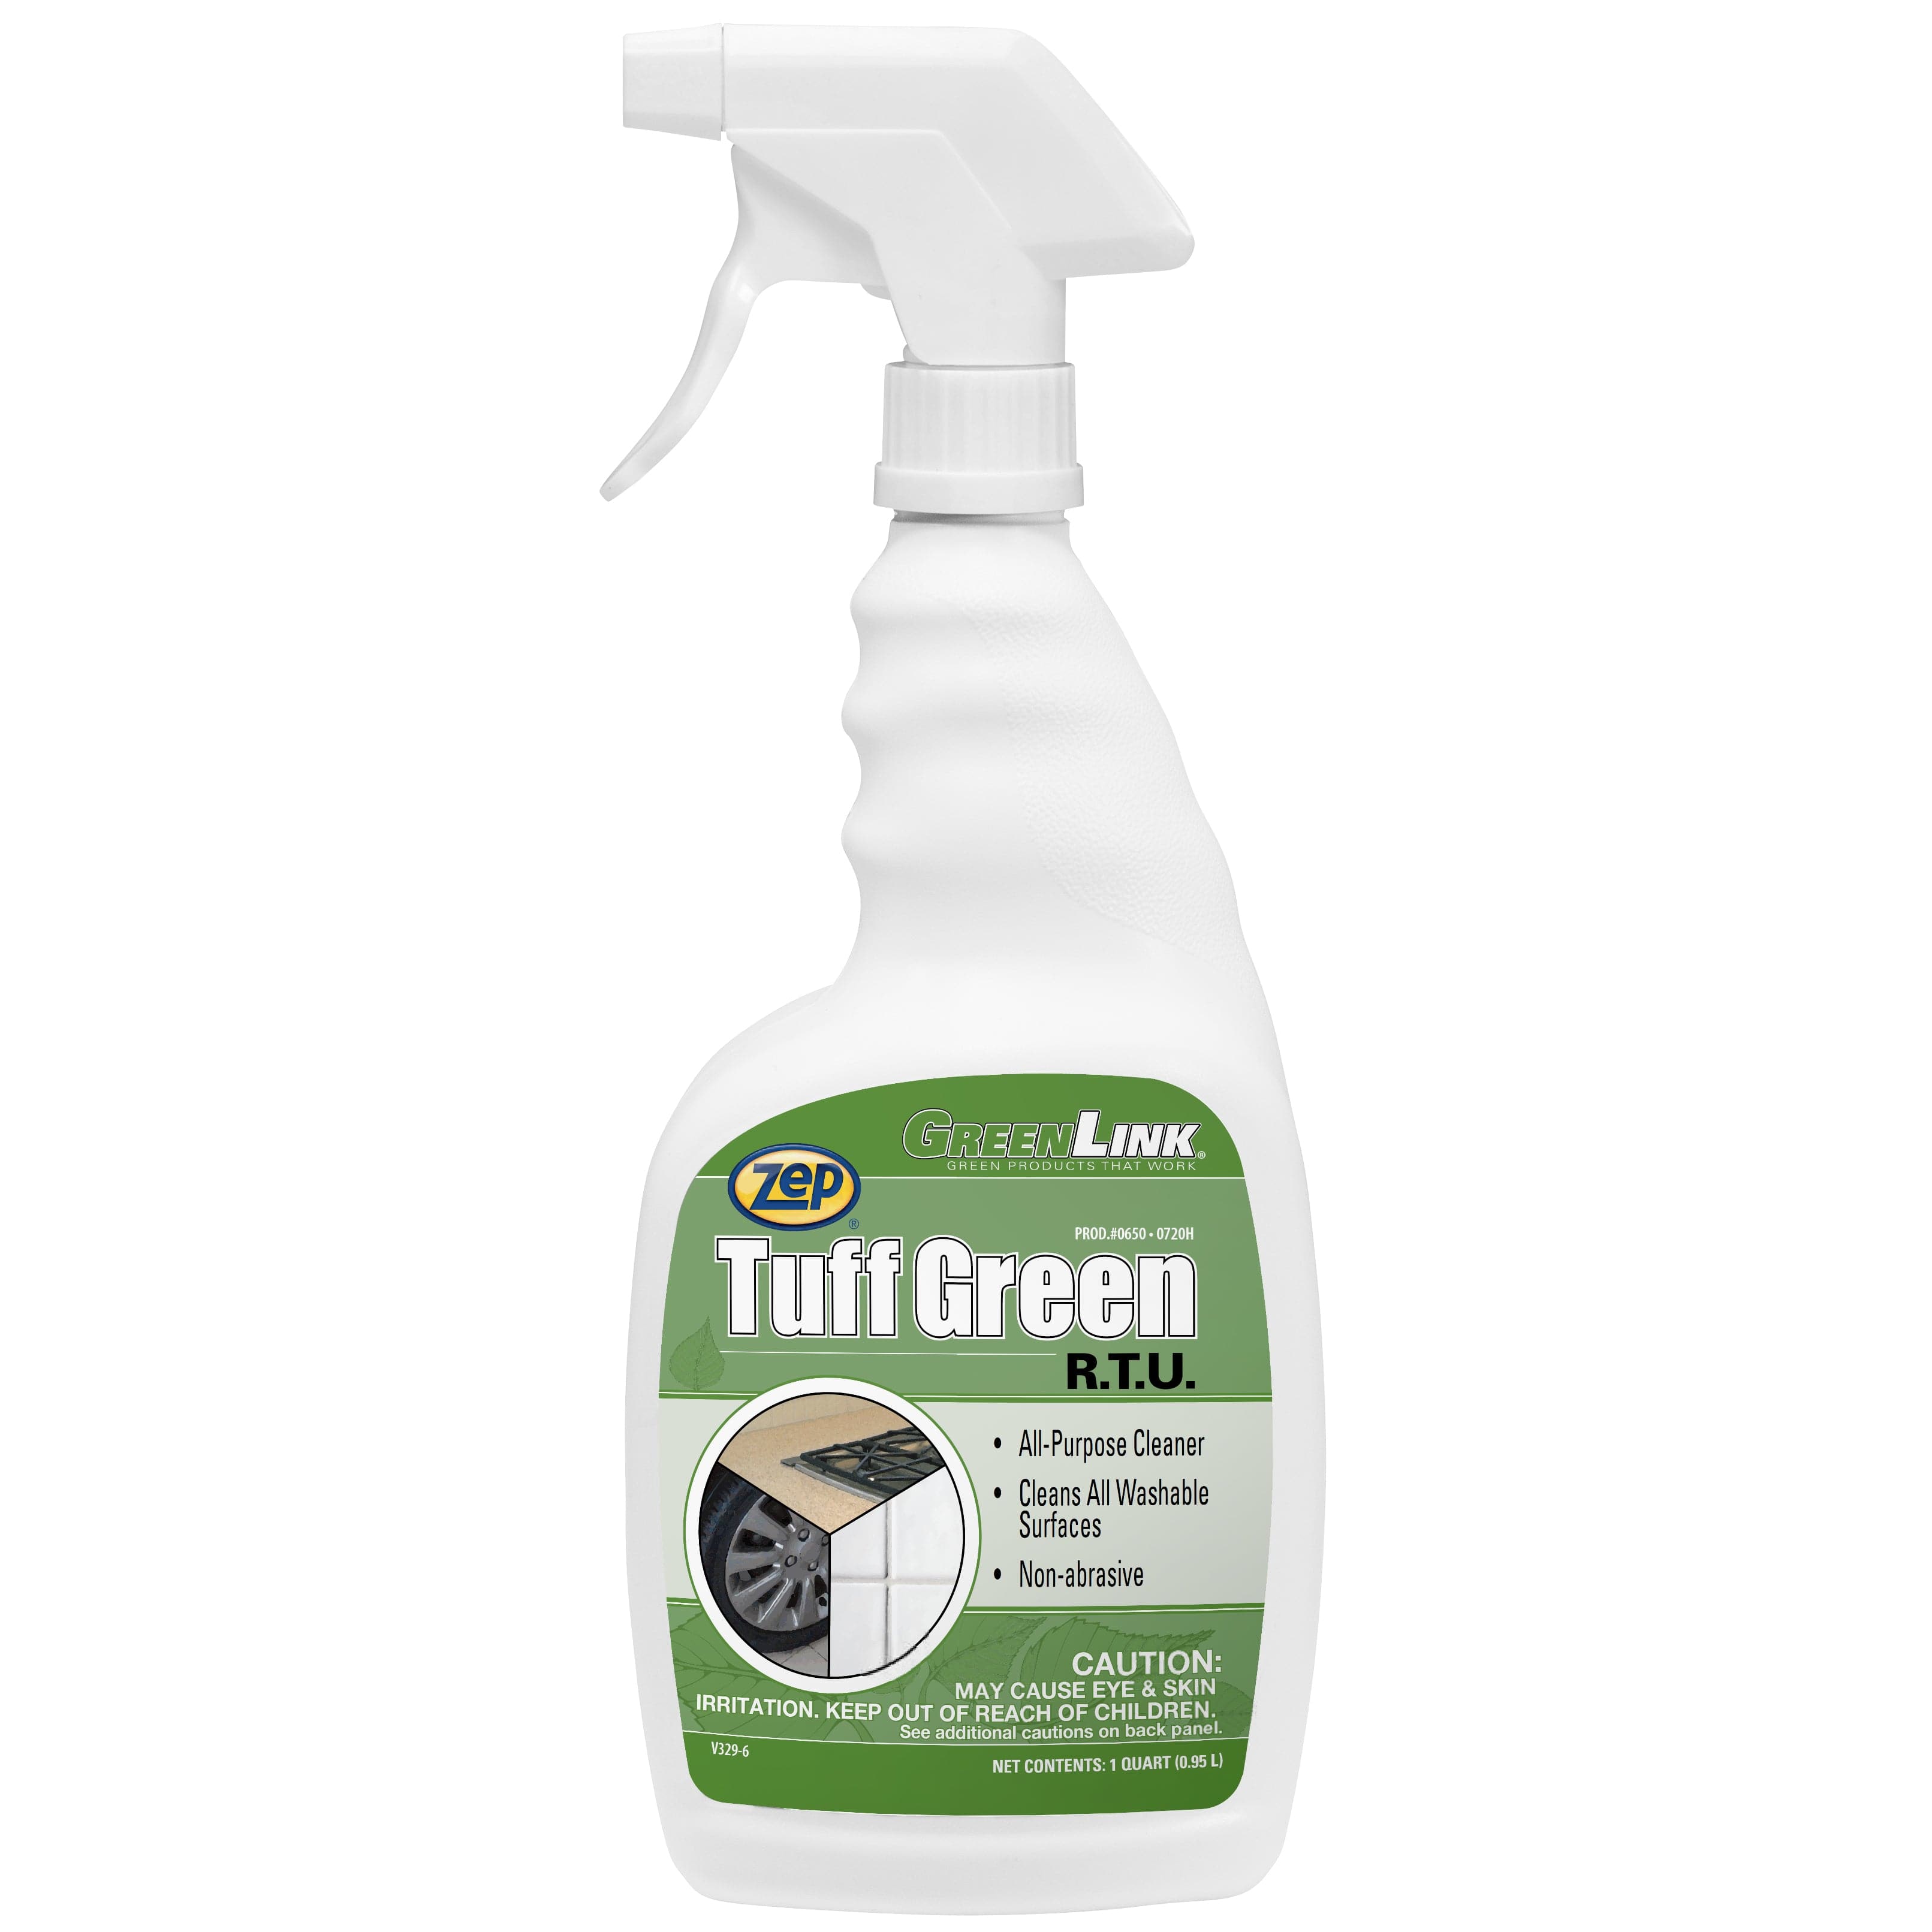 Image for Tuff Green All Purpose Cleaner - 32 oz.